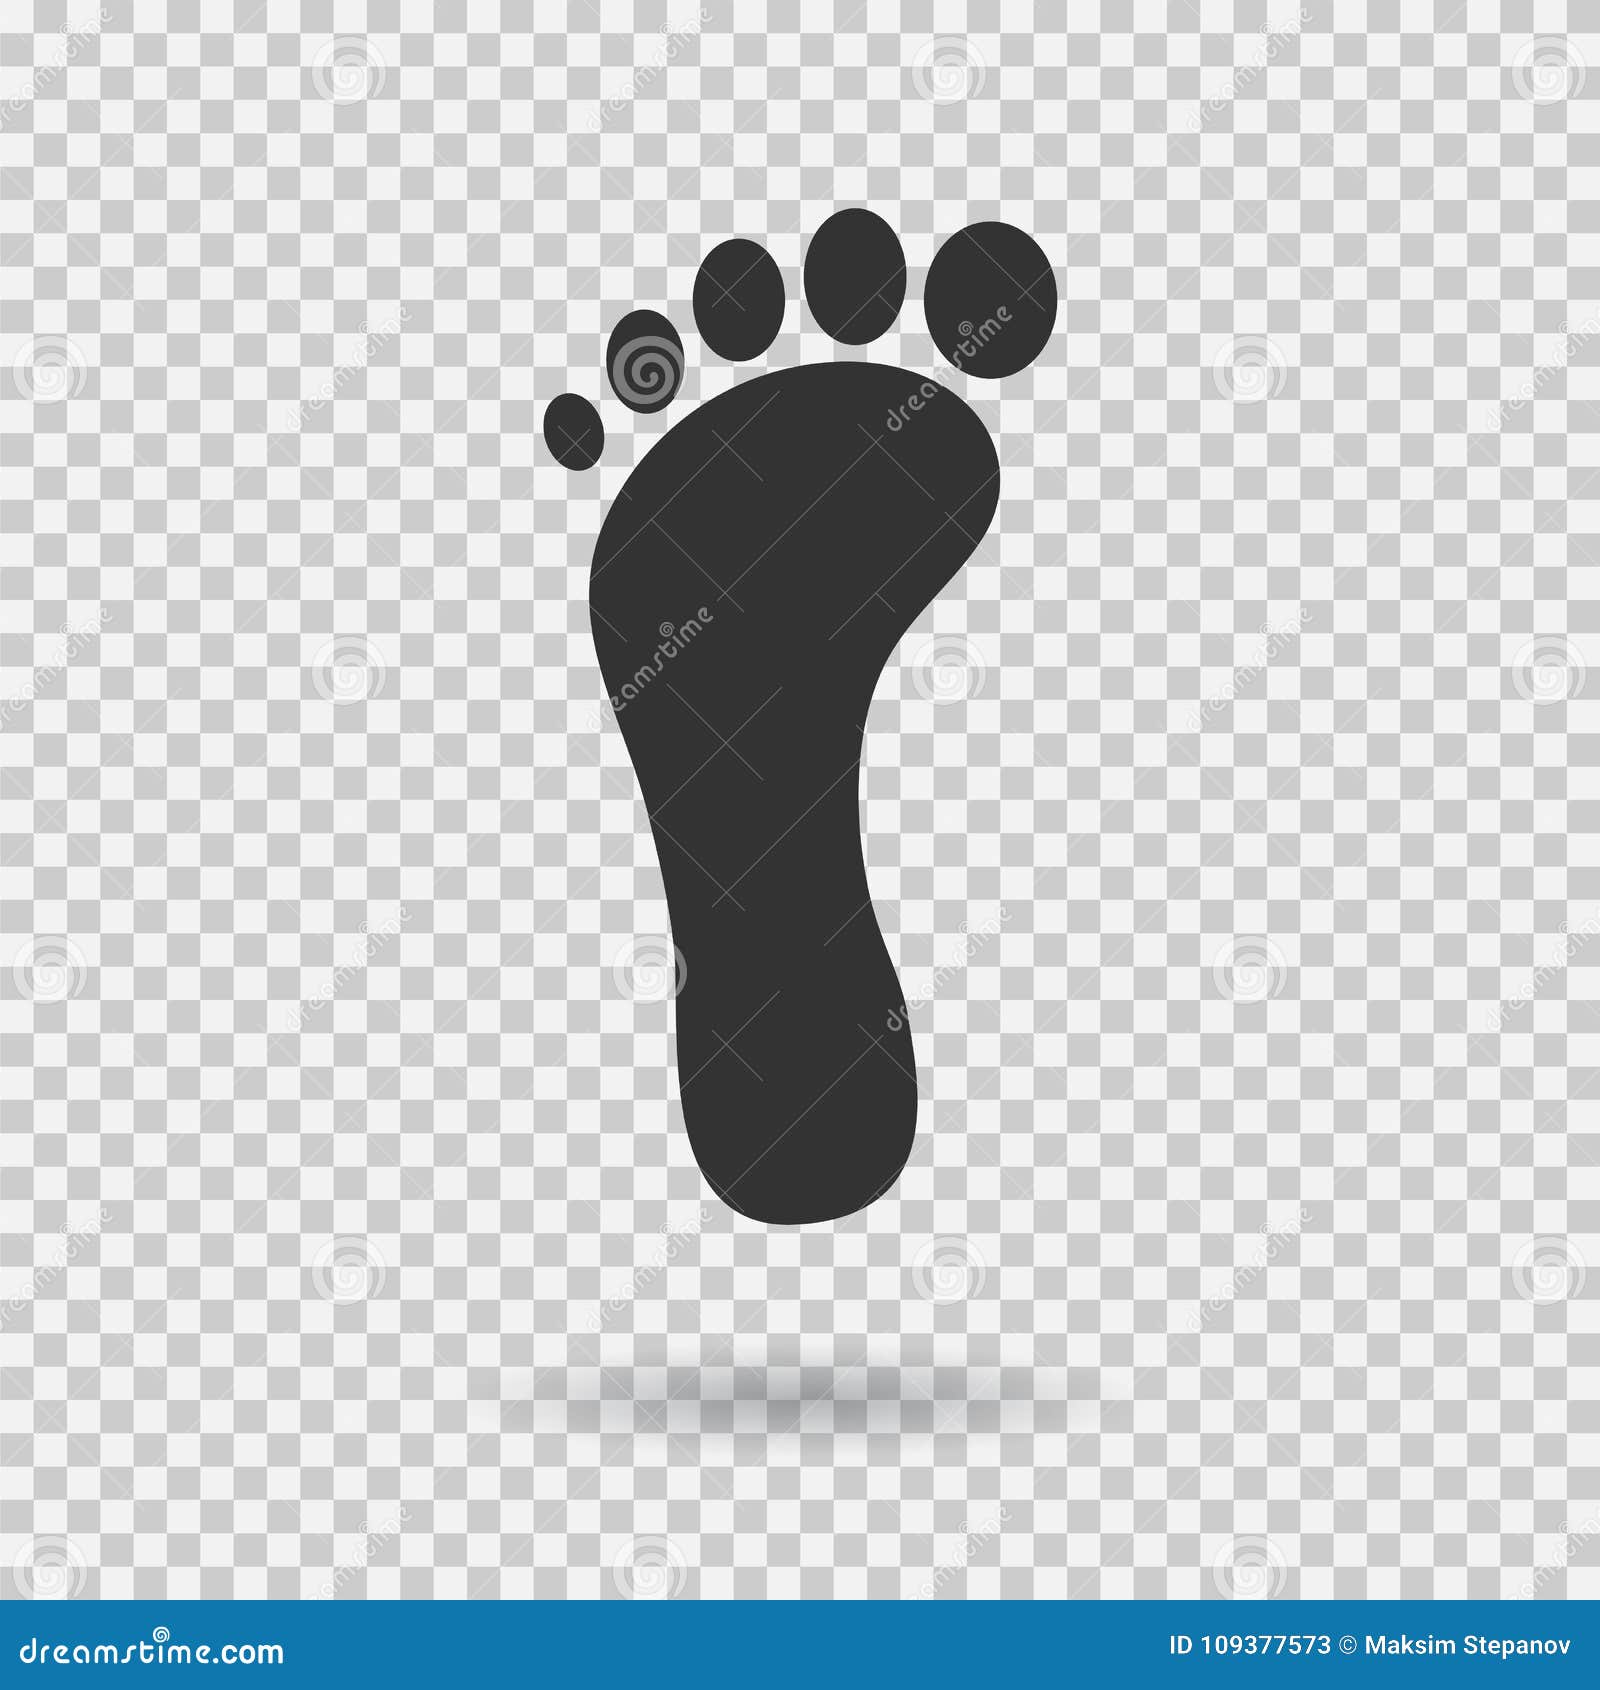 footstep icon.  footprint. flat style.  with shadown